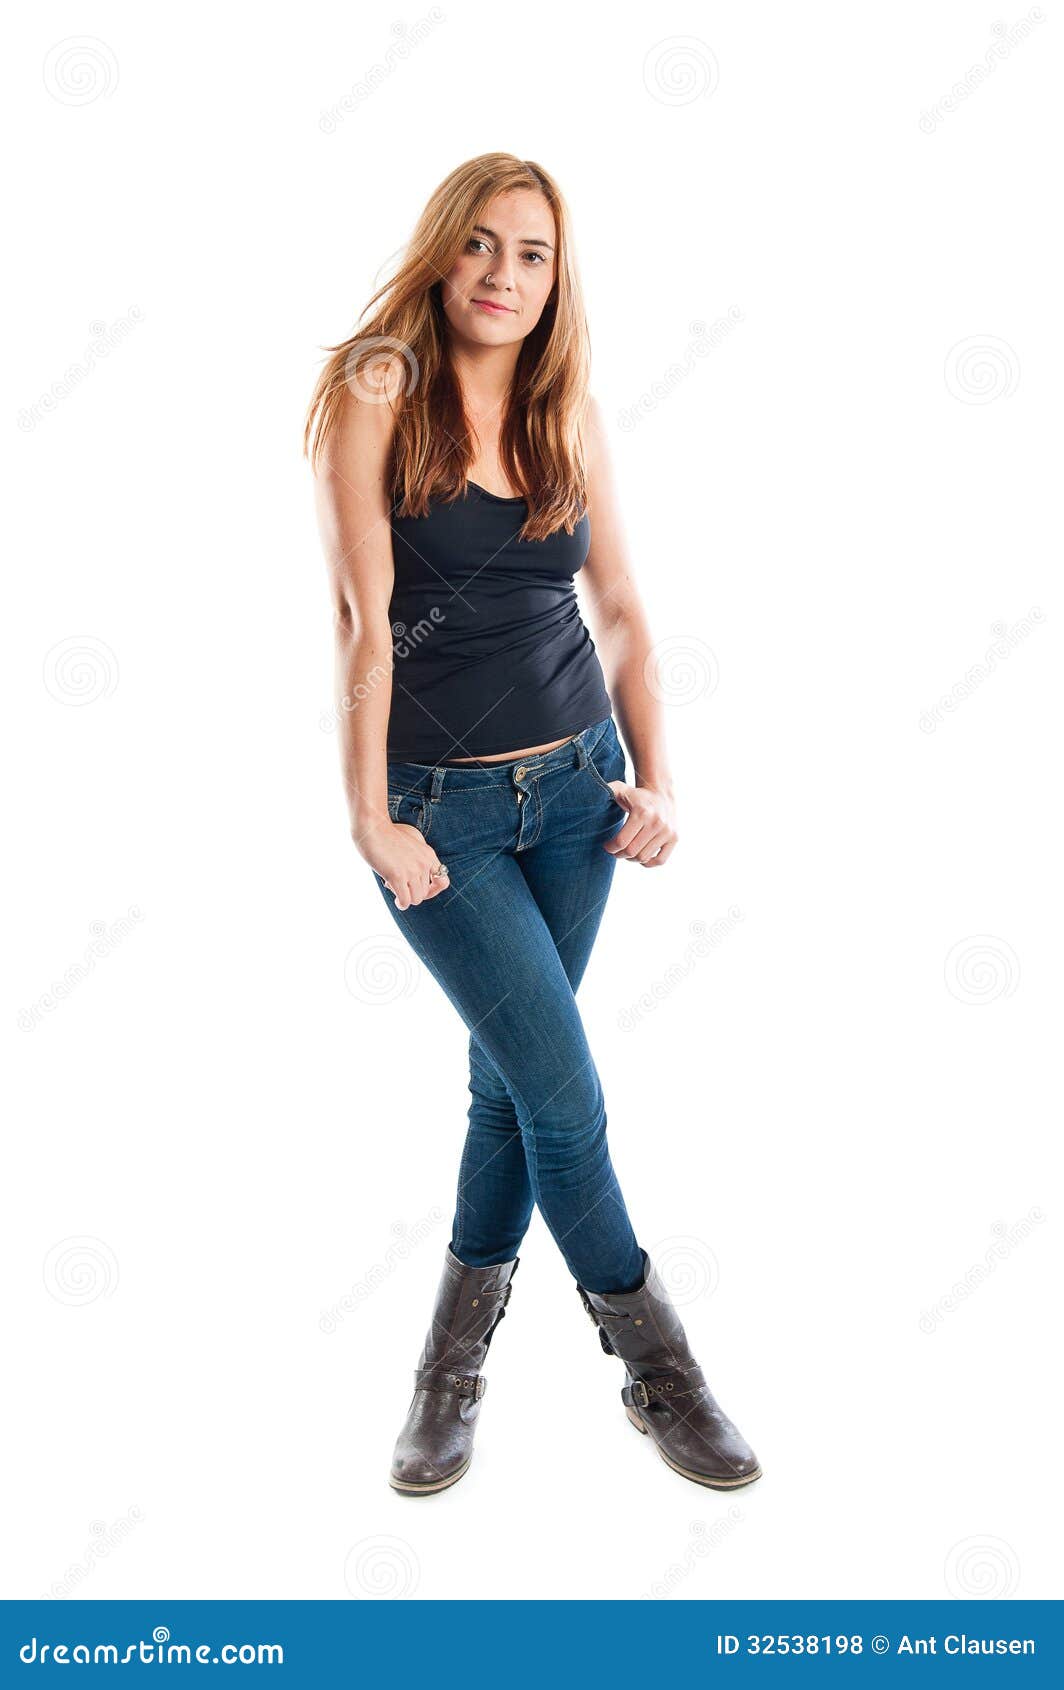 Full Body Portrait Of A Happy Smiling Young Woman Royalty Free Stock ...